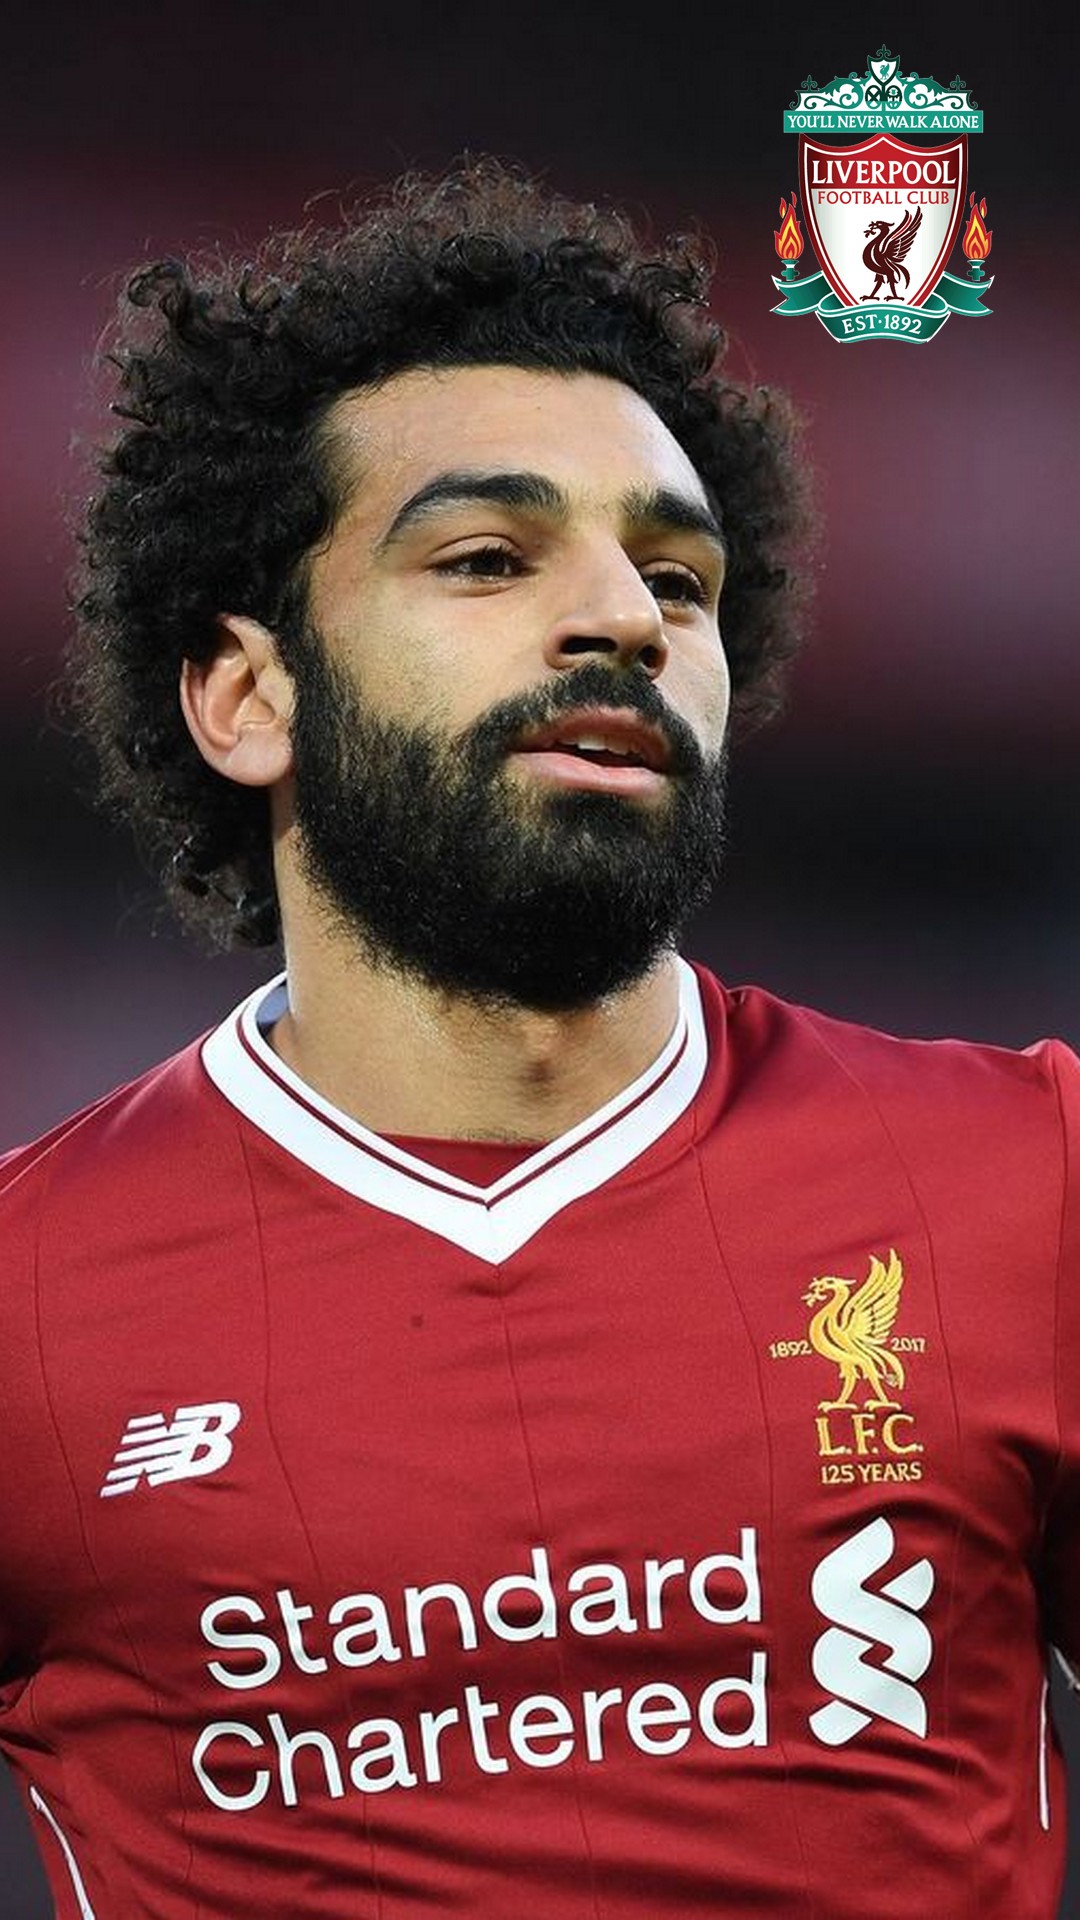 Mohamed Salah Pictures Android Wallpaper with resolution 1080X1920 pixel. You can make this wallpaper for your Android backgrounds, Tablet, Smartphones Screensavers and Mobile Phone Lock Screen